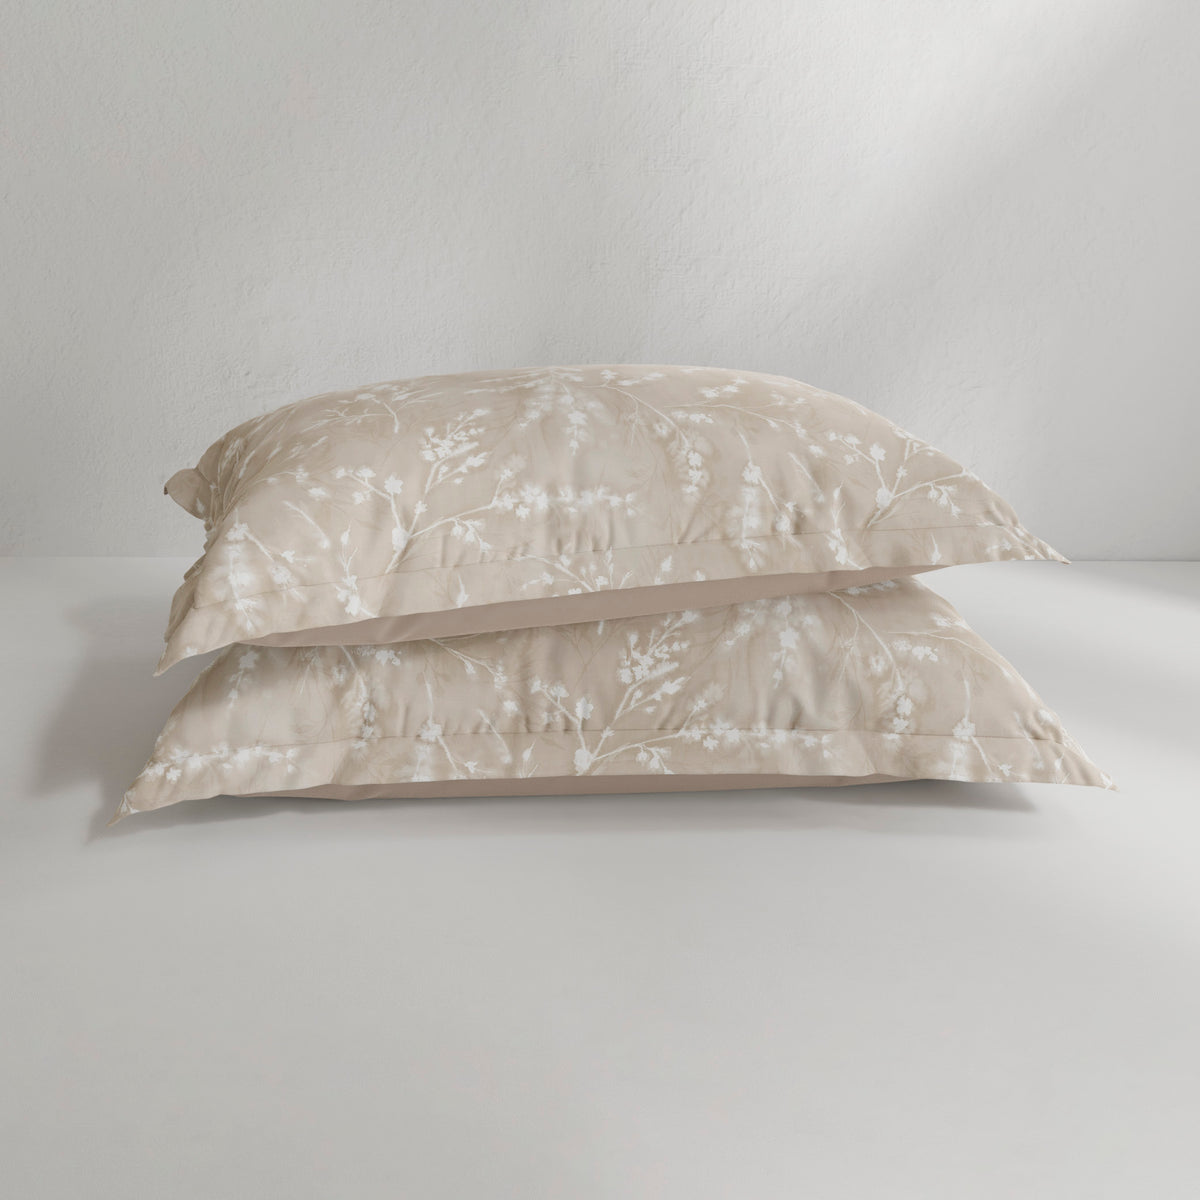 Image of two Floral Oatmeal Pillow Shams on pillows stacked on top of each other with a white background